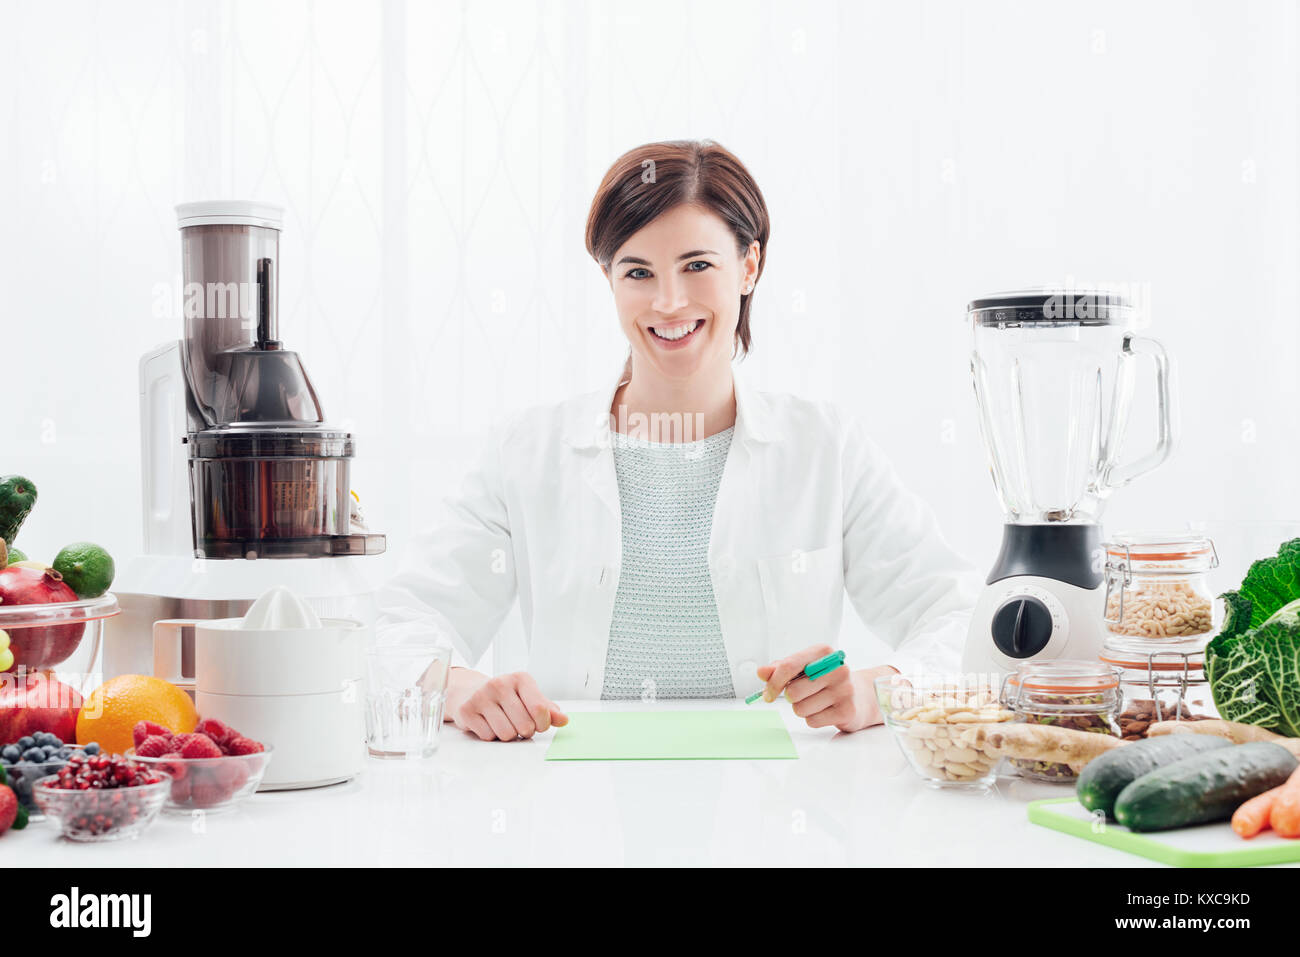 Smiling professional nutritionist holding an apple, she has healthy fruits, vegetables and juicers on her desk; healthy diet and wellness concept Stock Photo